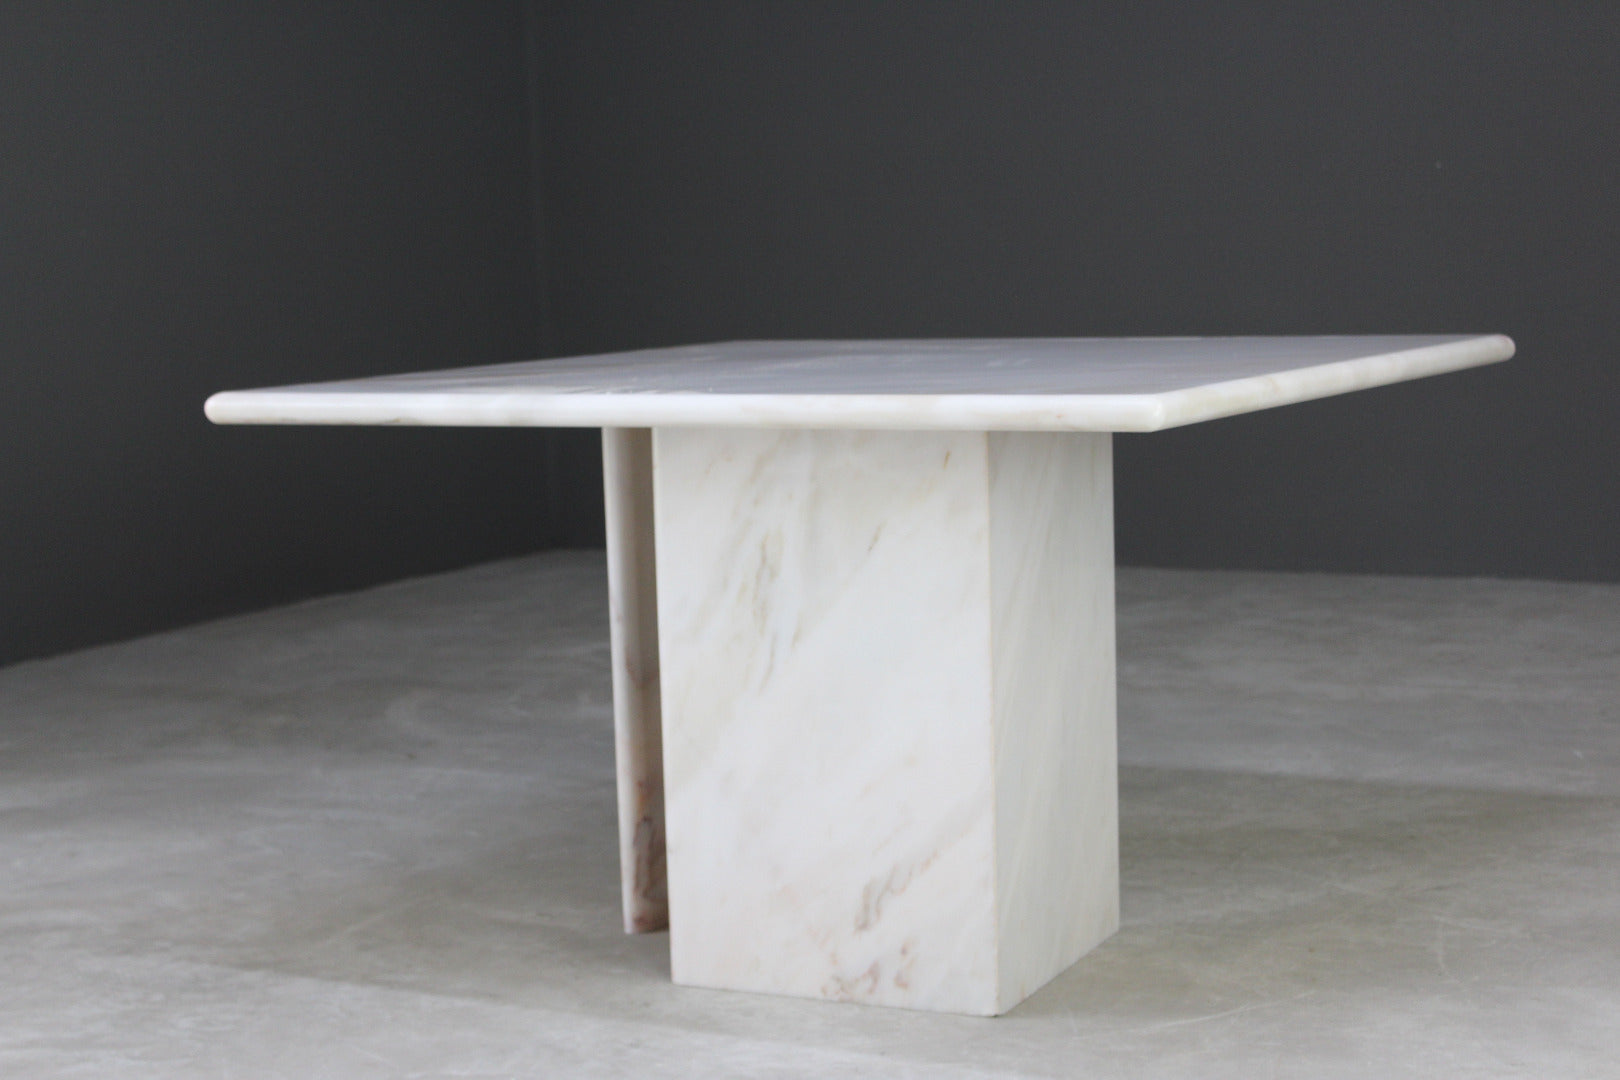 Large Square Marble Coffee Table - Kernow Furniture